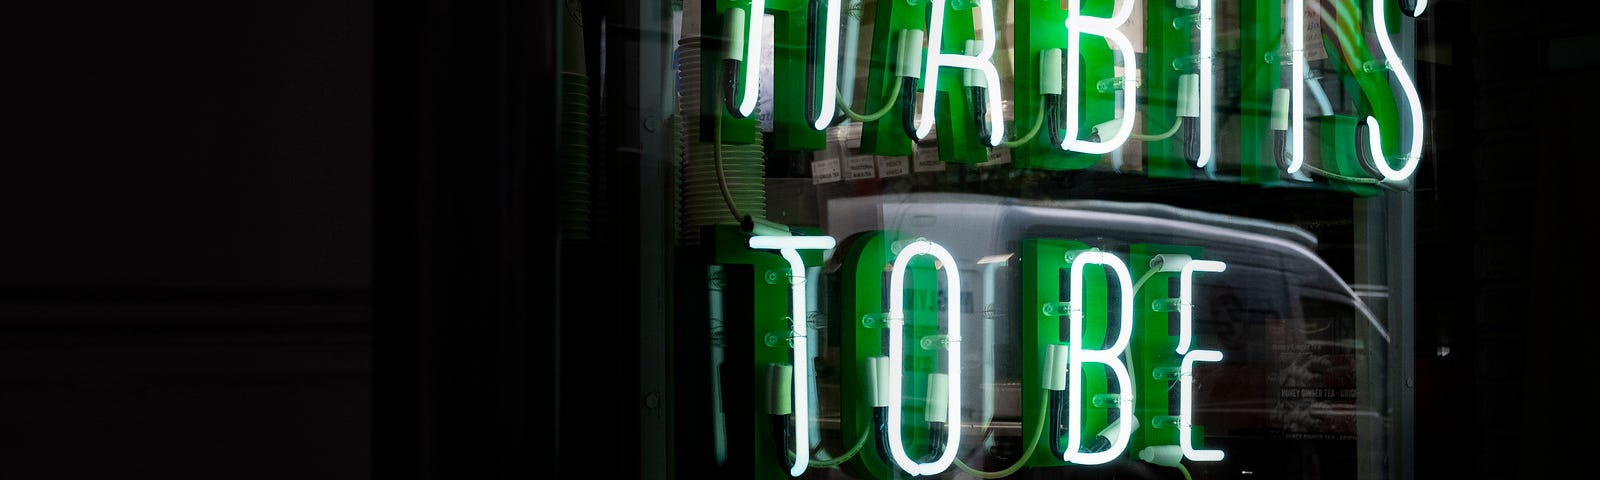 An image of a sign in green lights saying ‘Habits to be made’.